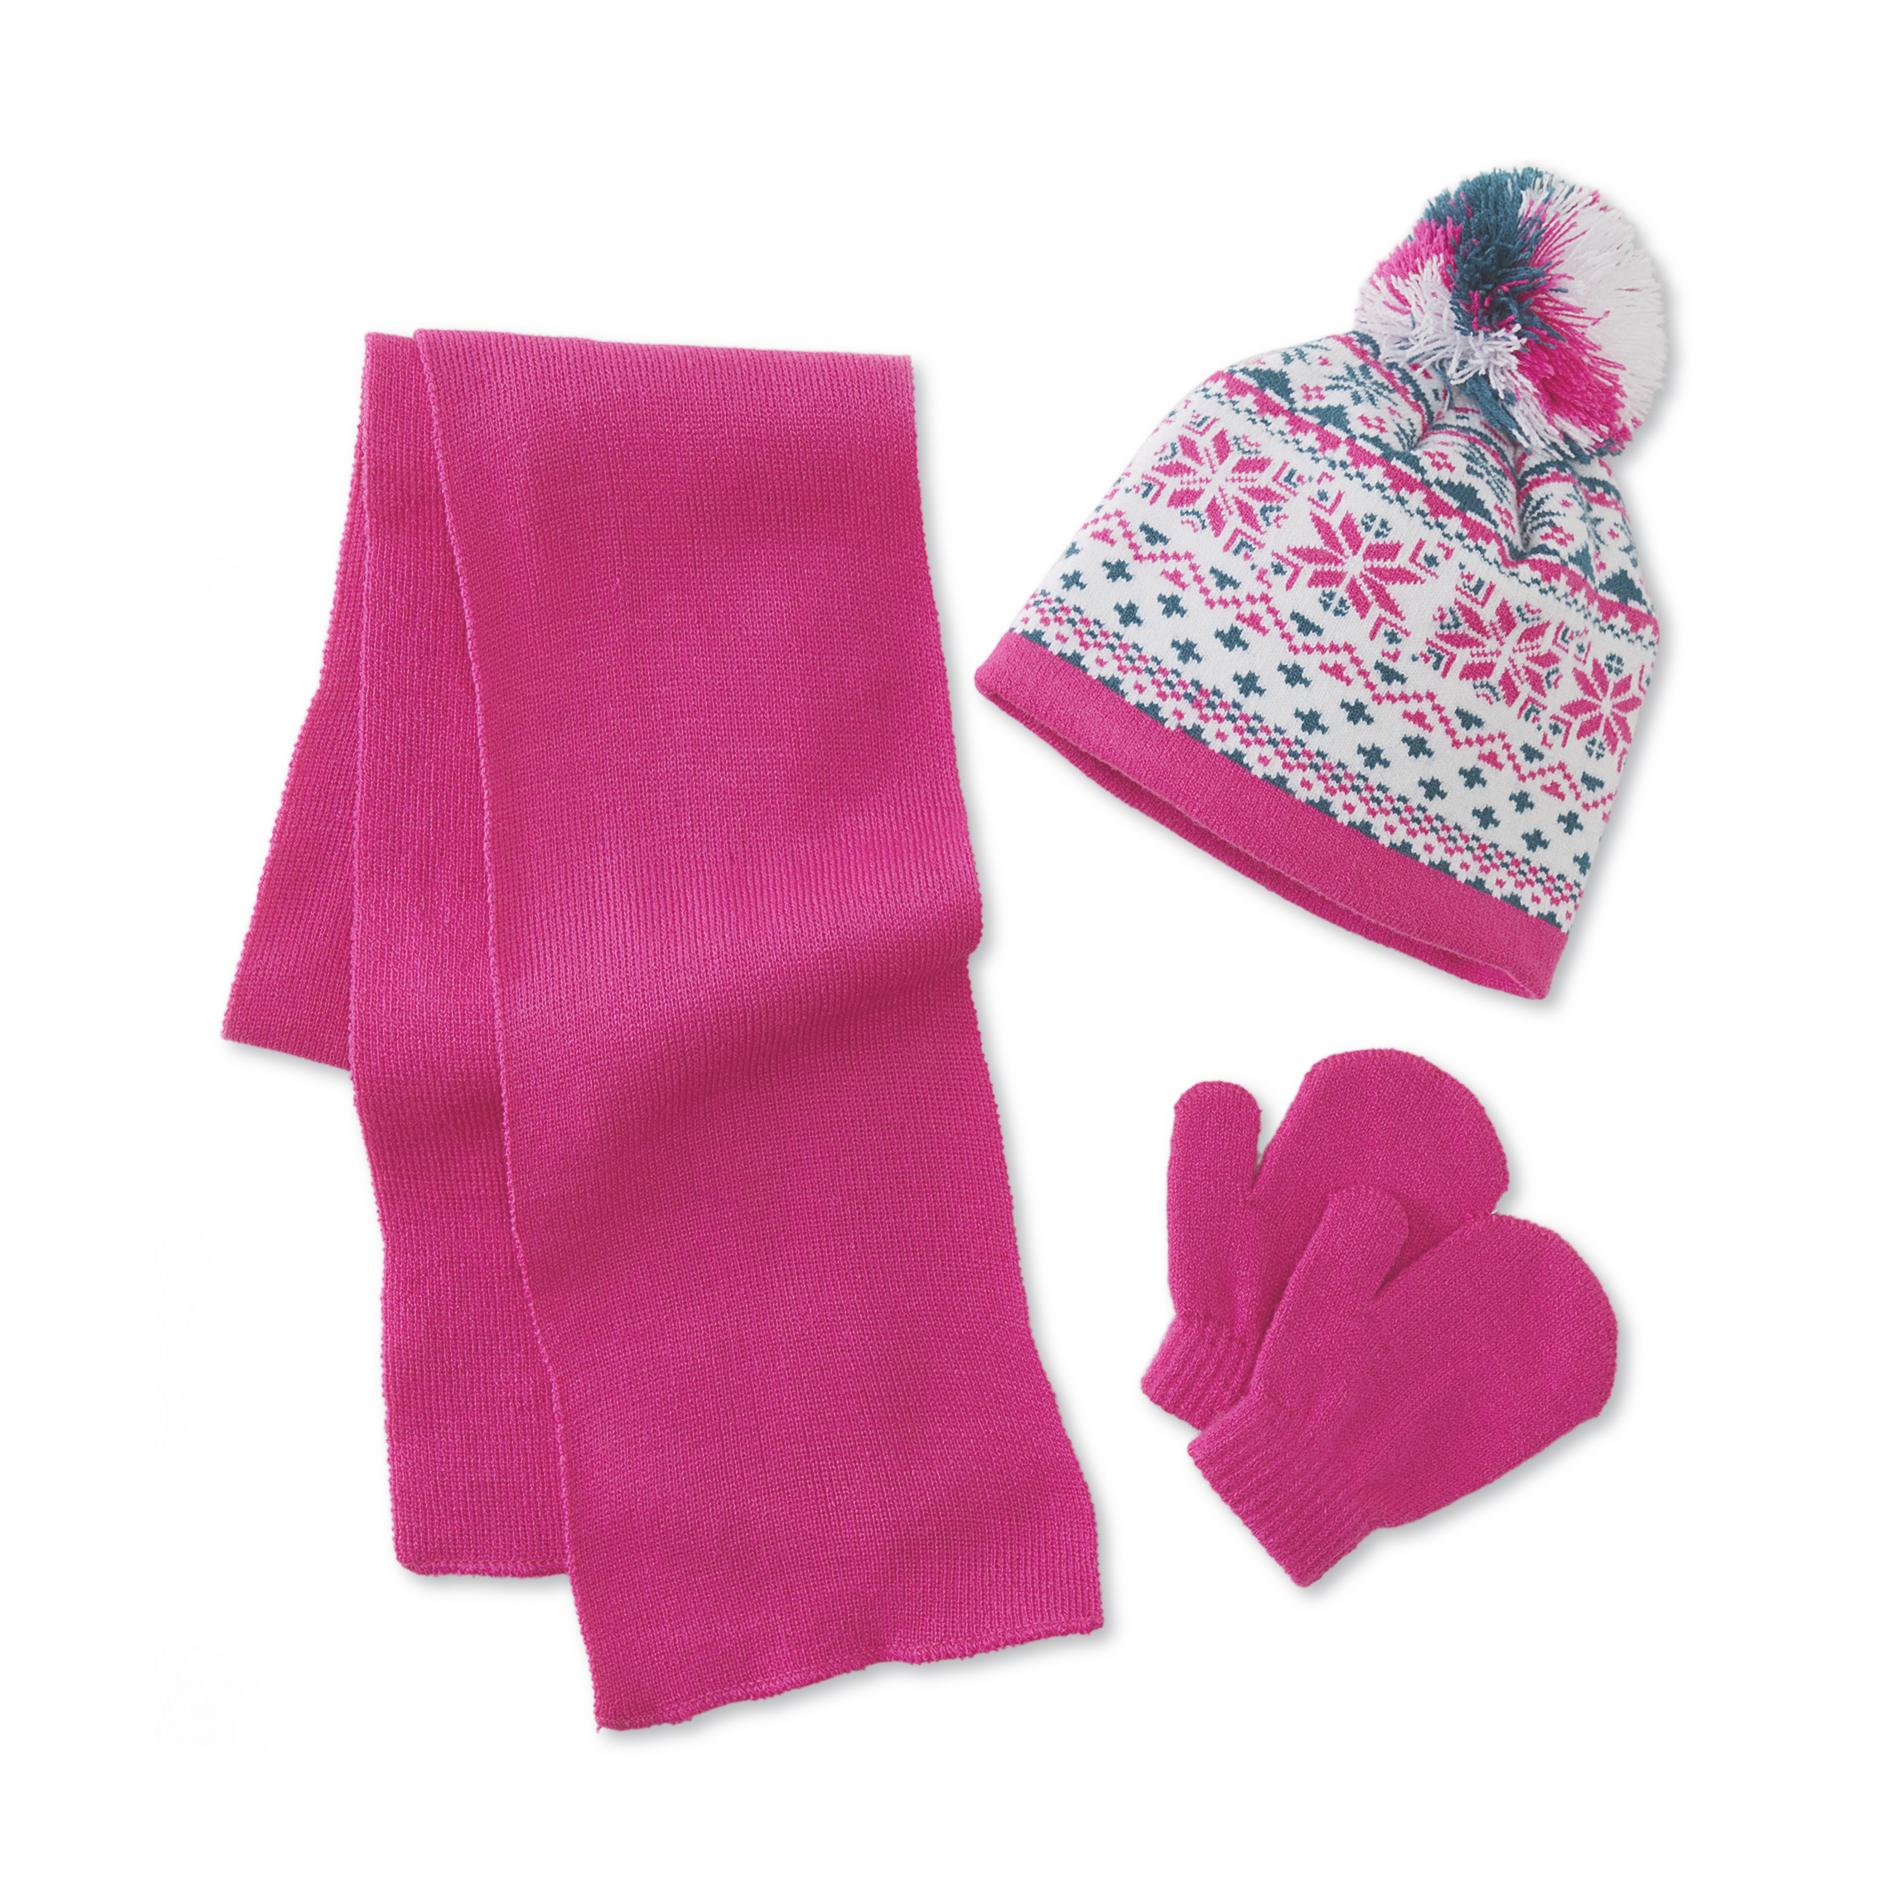 0083009005672 - GIRL'S KNIT HAT SCARF & MITTENS - SNOWFLAKES